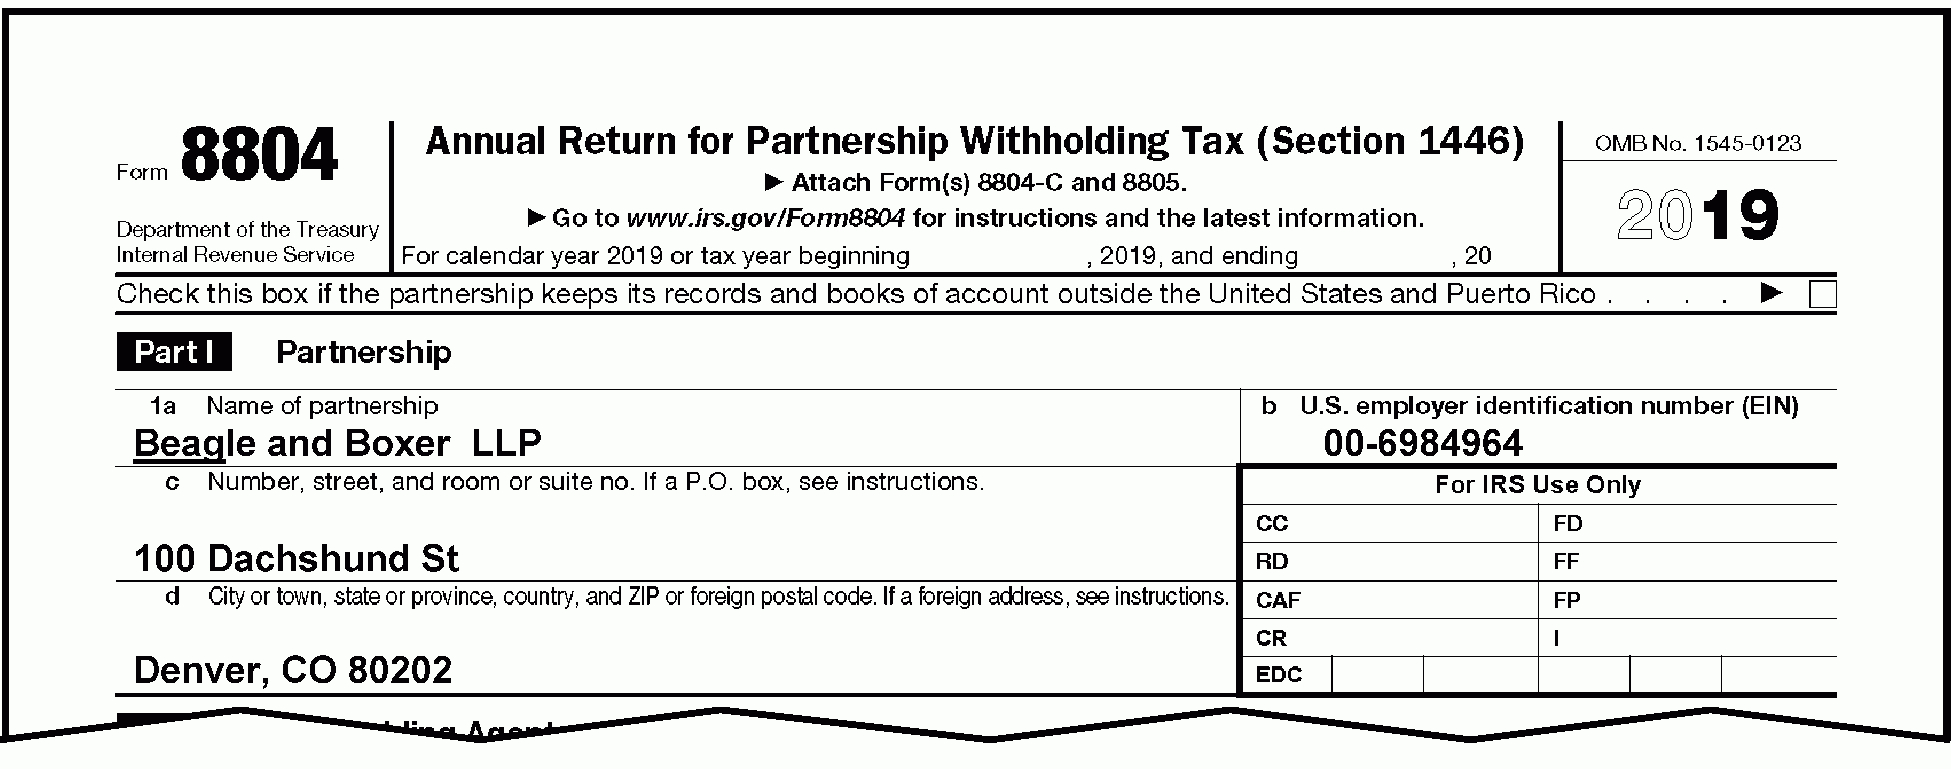 3.22.15 Foreign Partnership Withholding | Internal Revenue throughout Isabel A Calendar Year Taxpayer